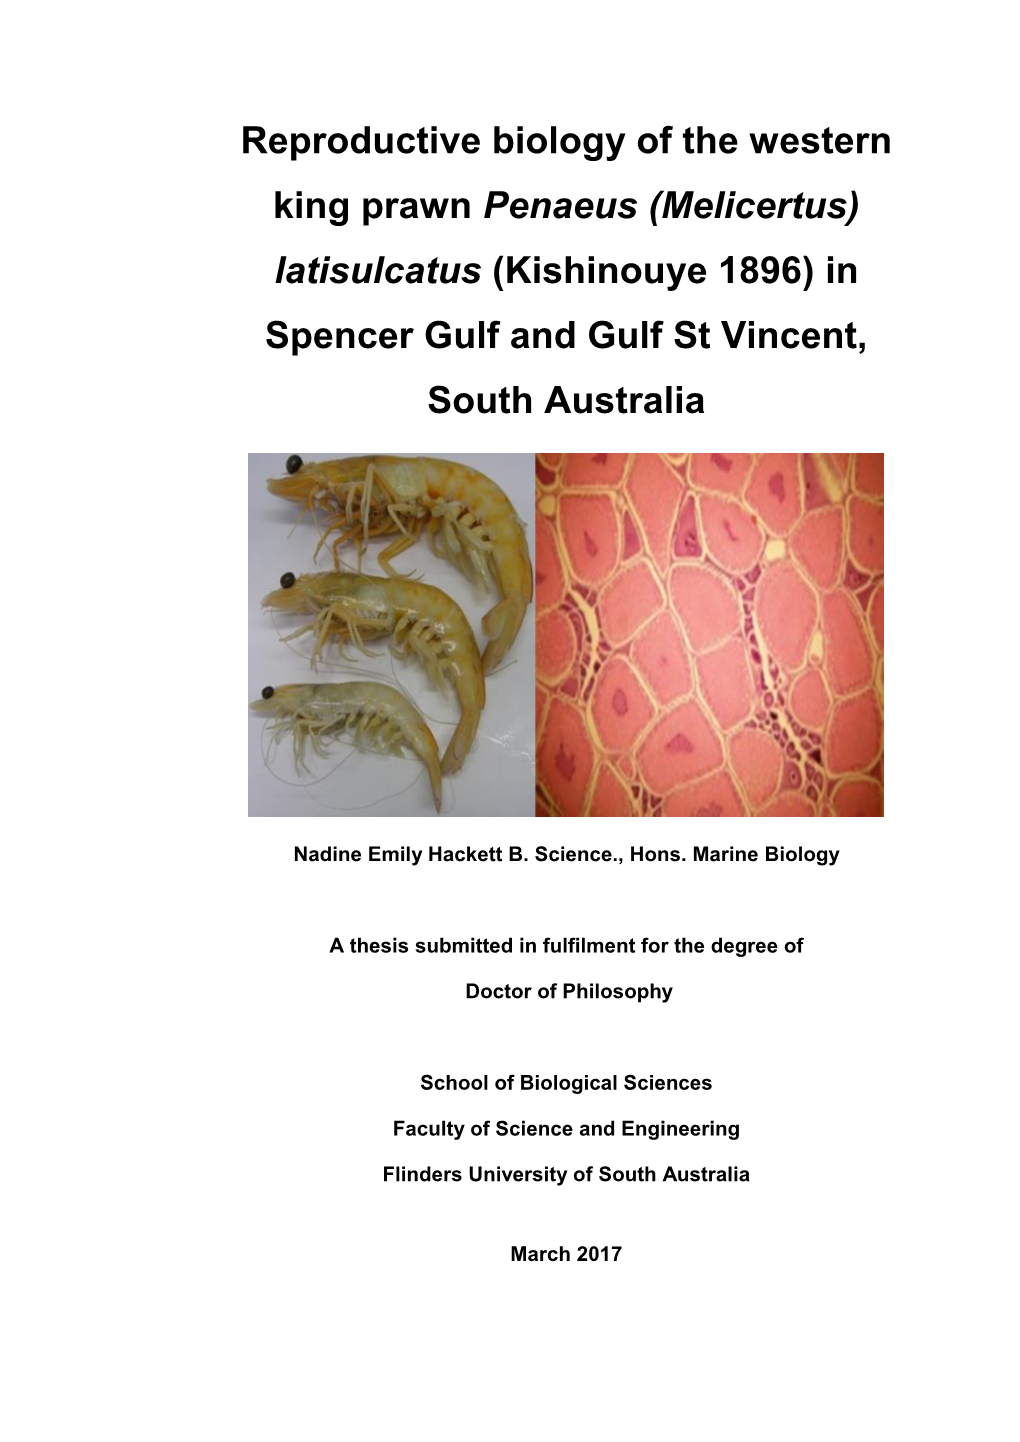 Reproductive Biology of the Western King Prawn Penaeus (Melicertus) Latisulcatus (Kishinouye 1896) in Spencer Gulf and Gulf St Vincent, South Australia